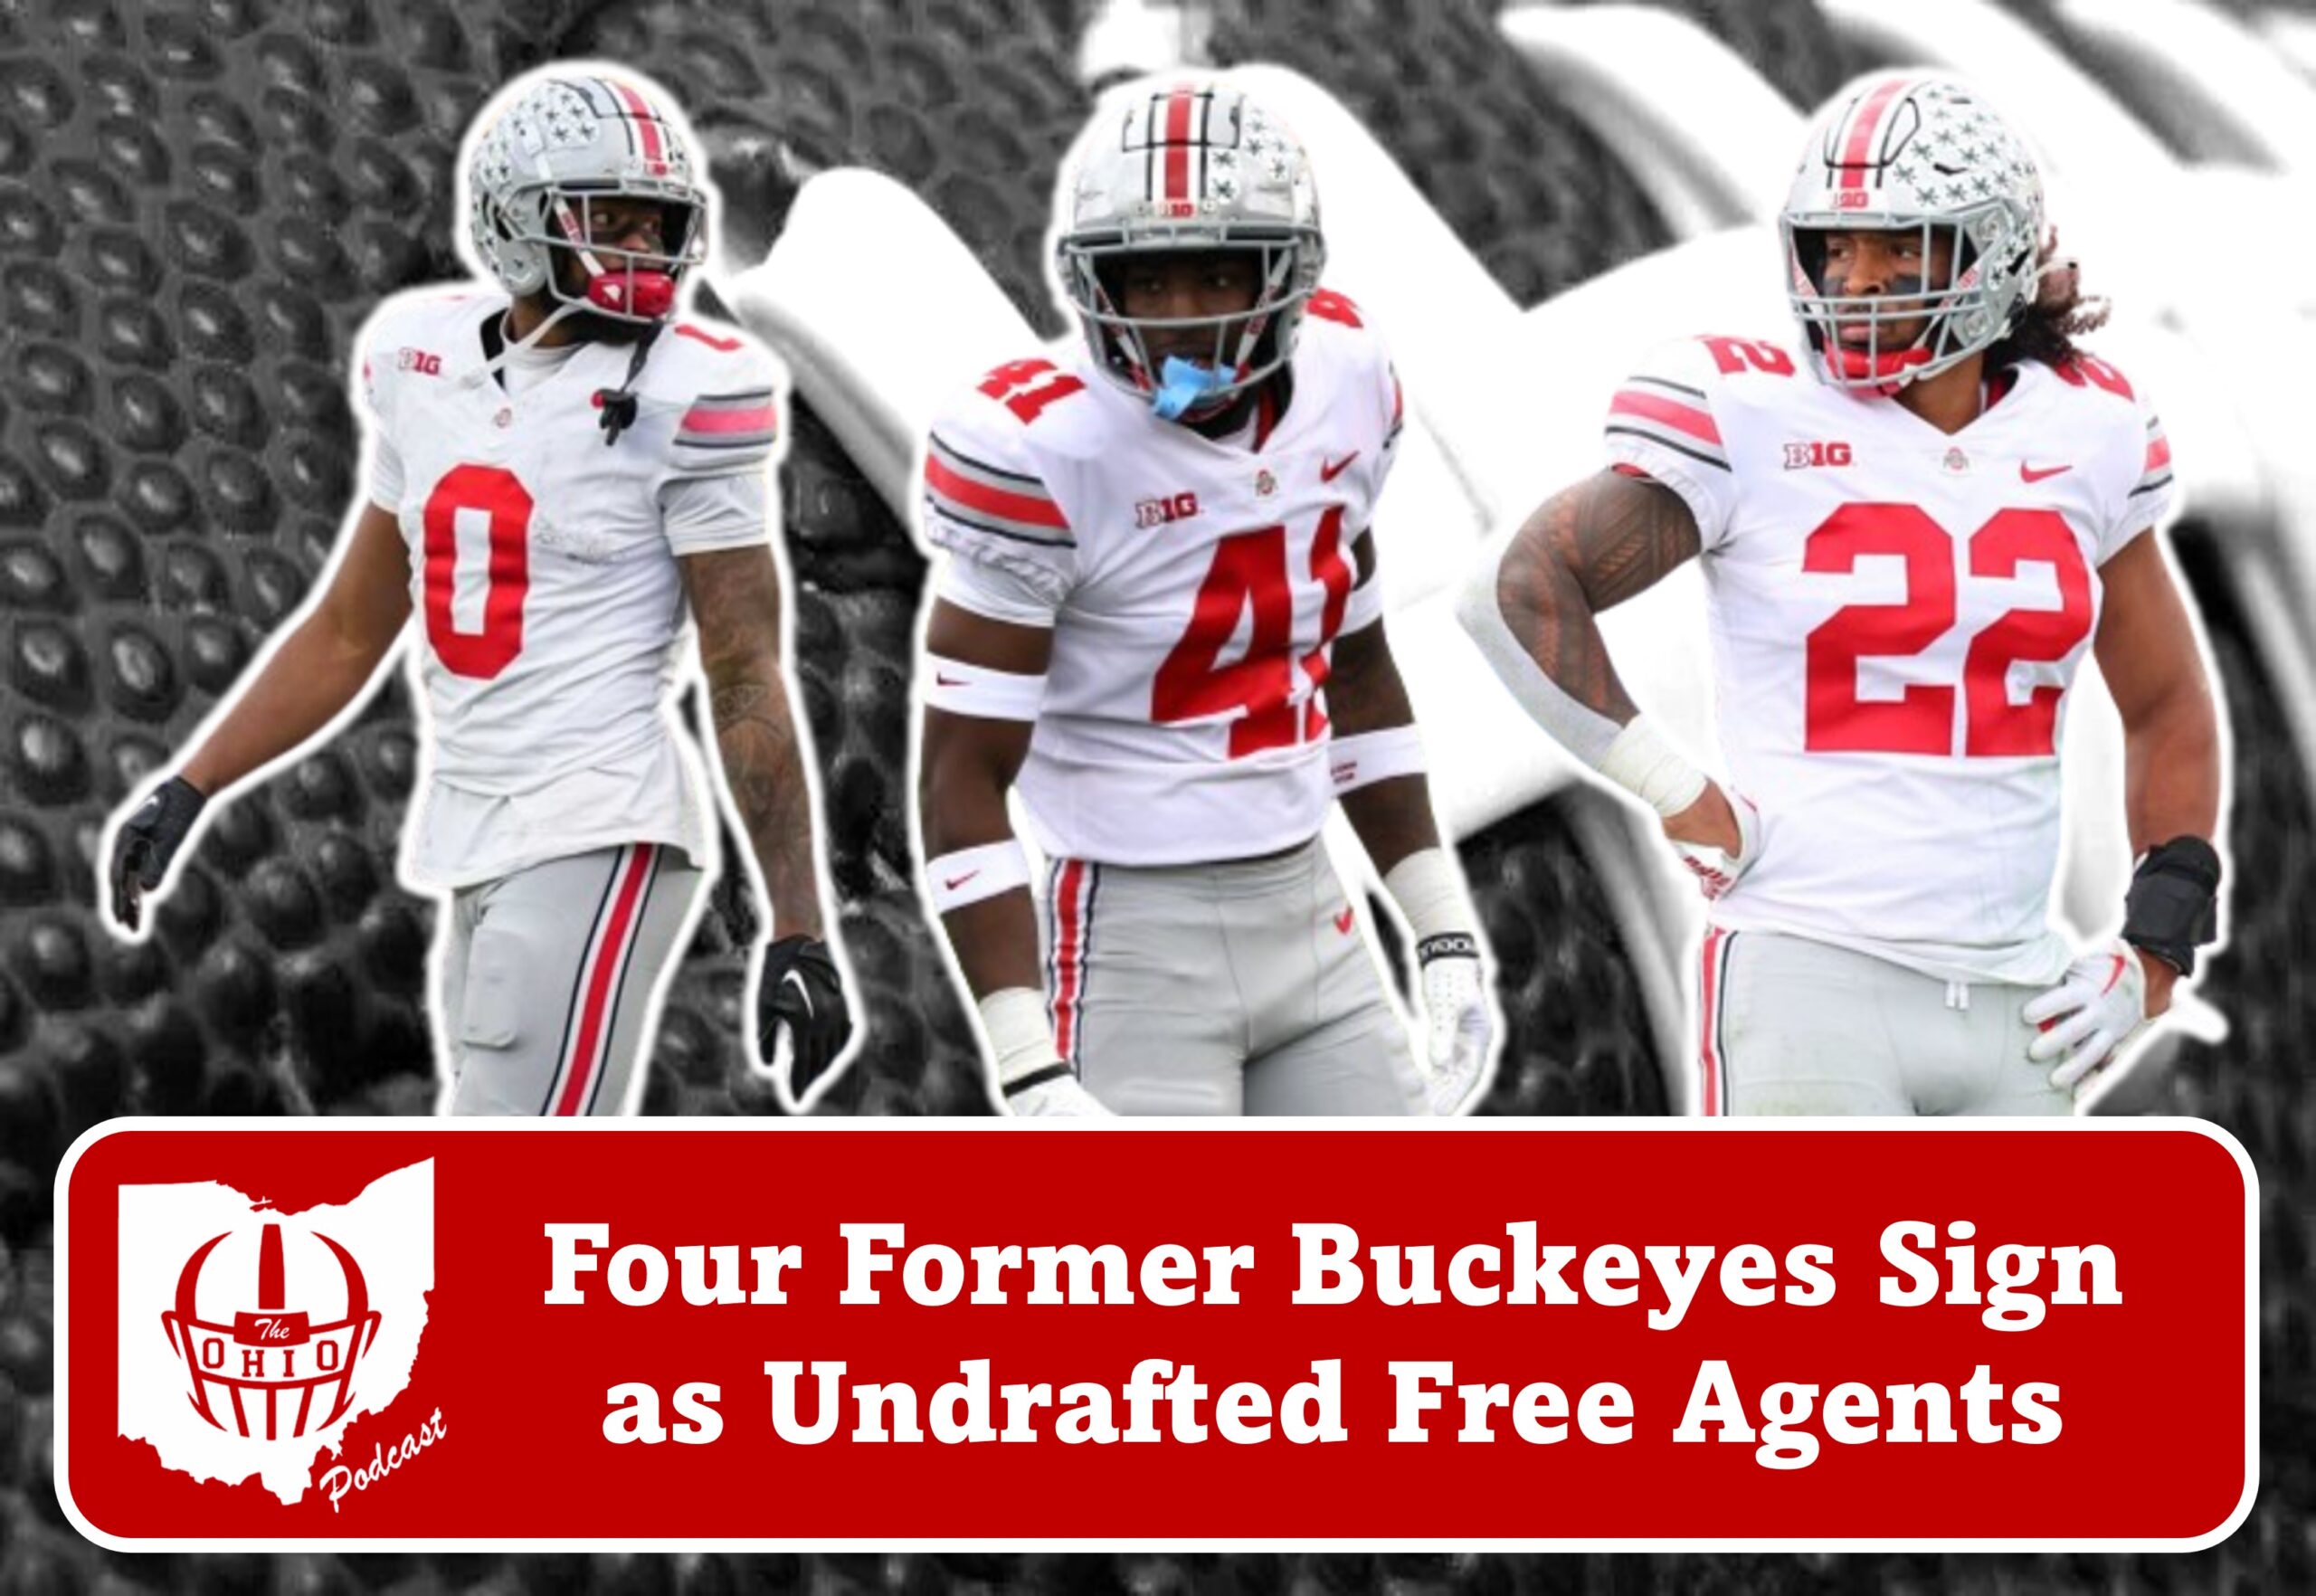 Four Former Buckeyes Sign as Undrafted Free Agents